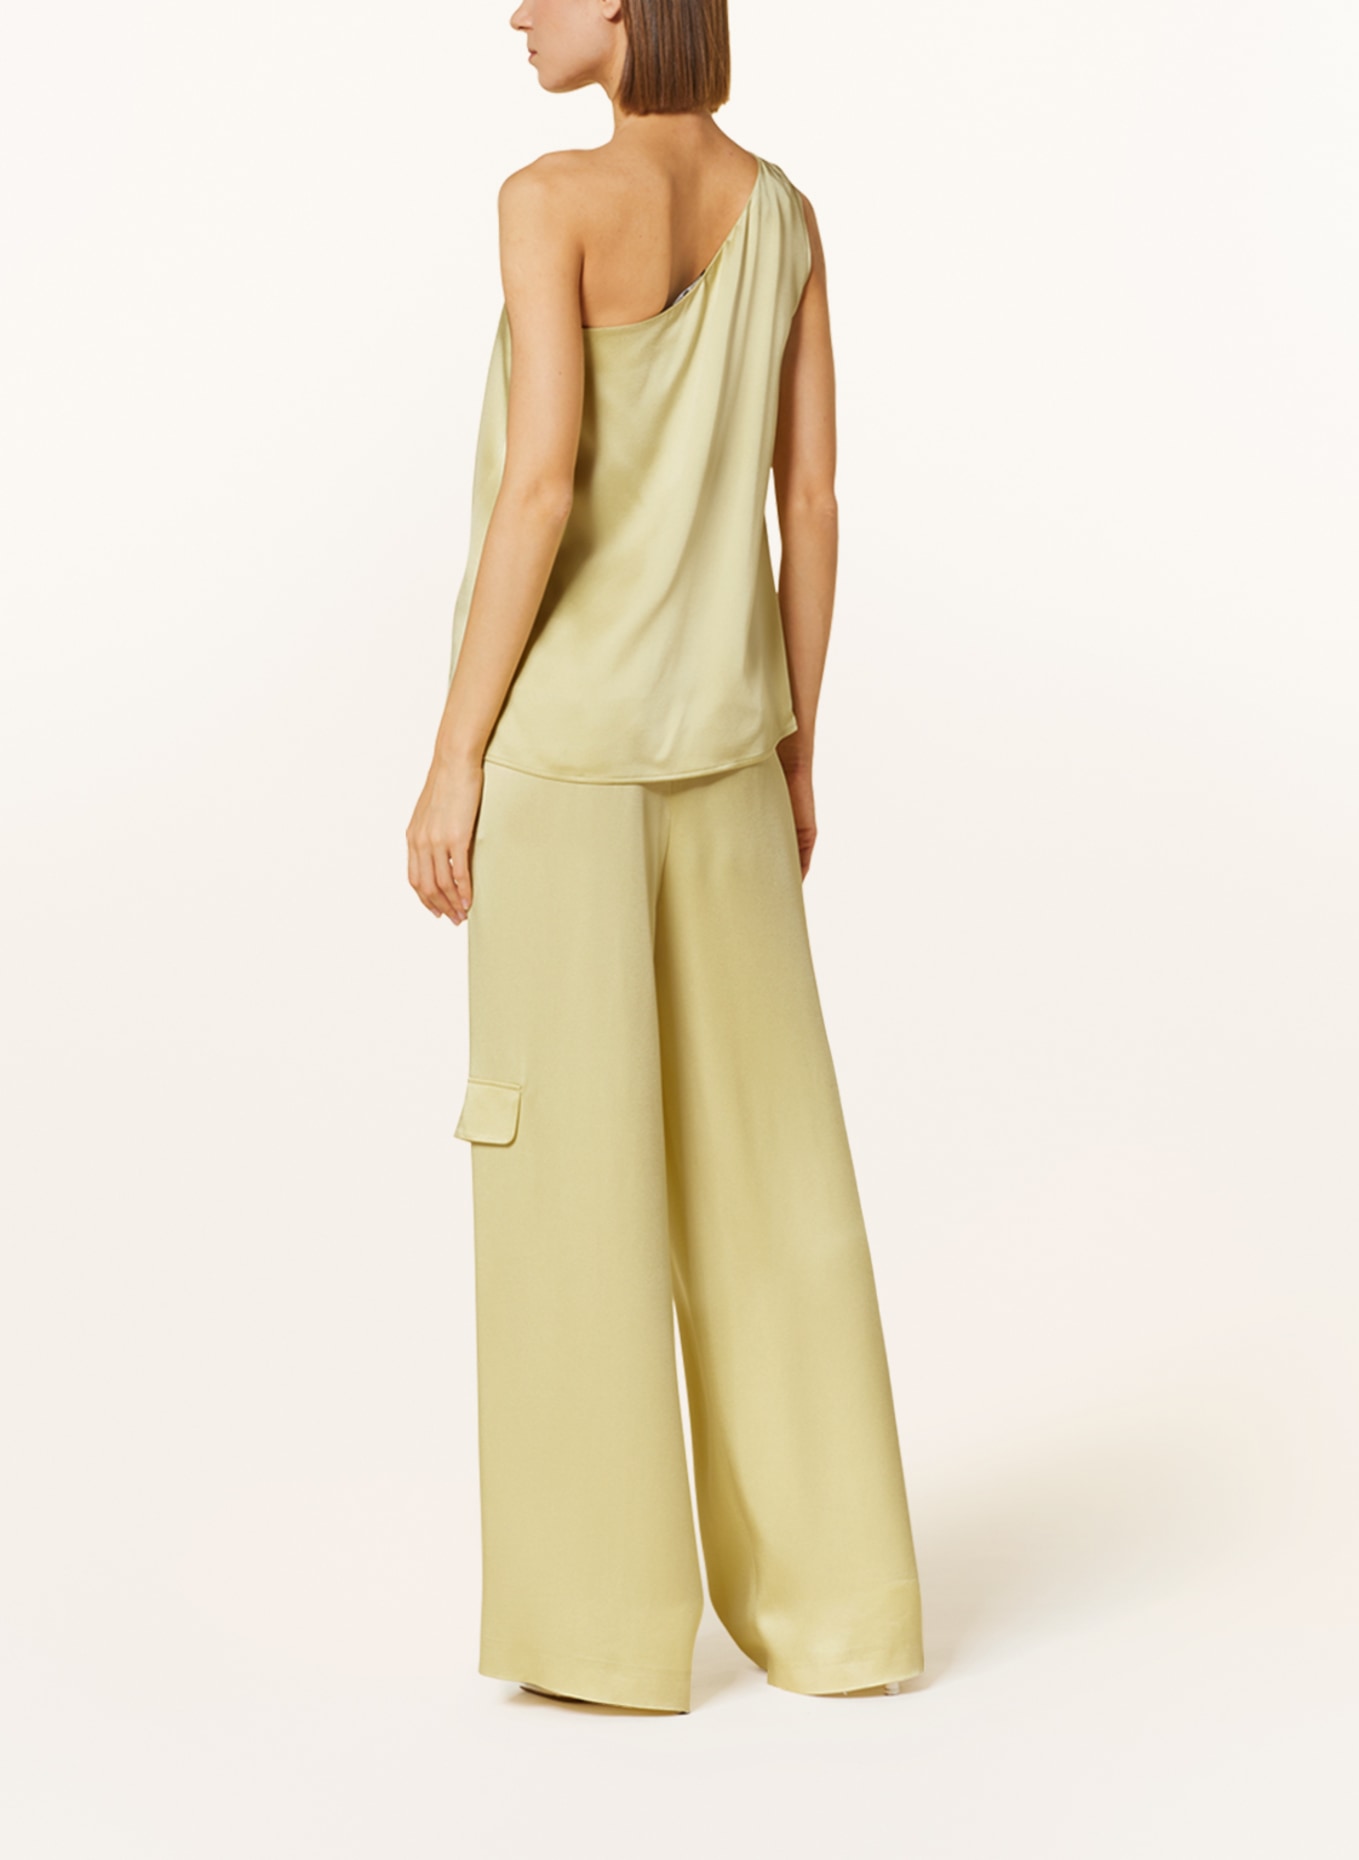 LUISA CERANO One-shoulder top made of satin, Color: LIGHT YELLOW (Image 3)